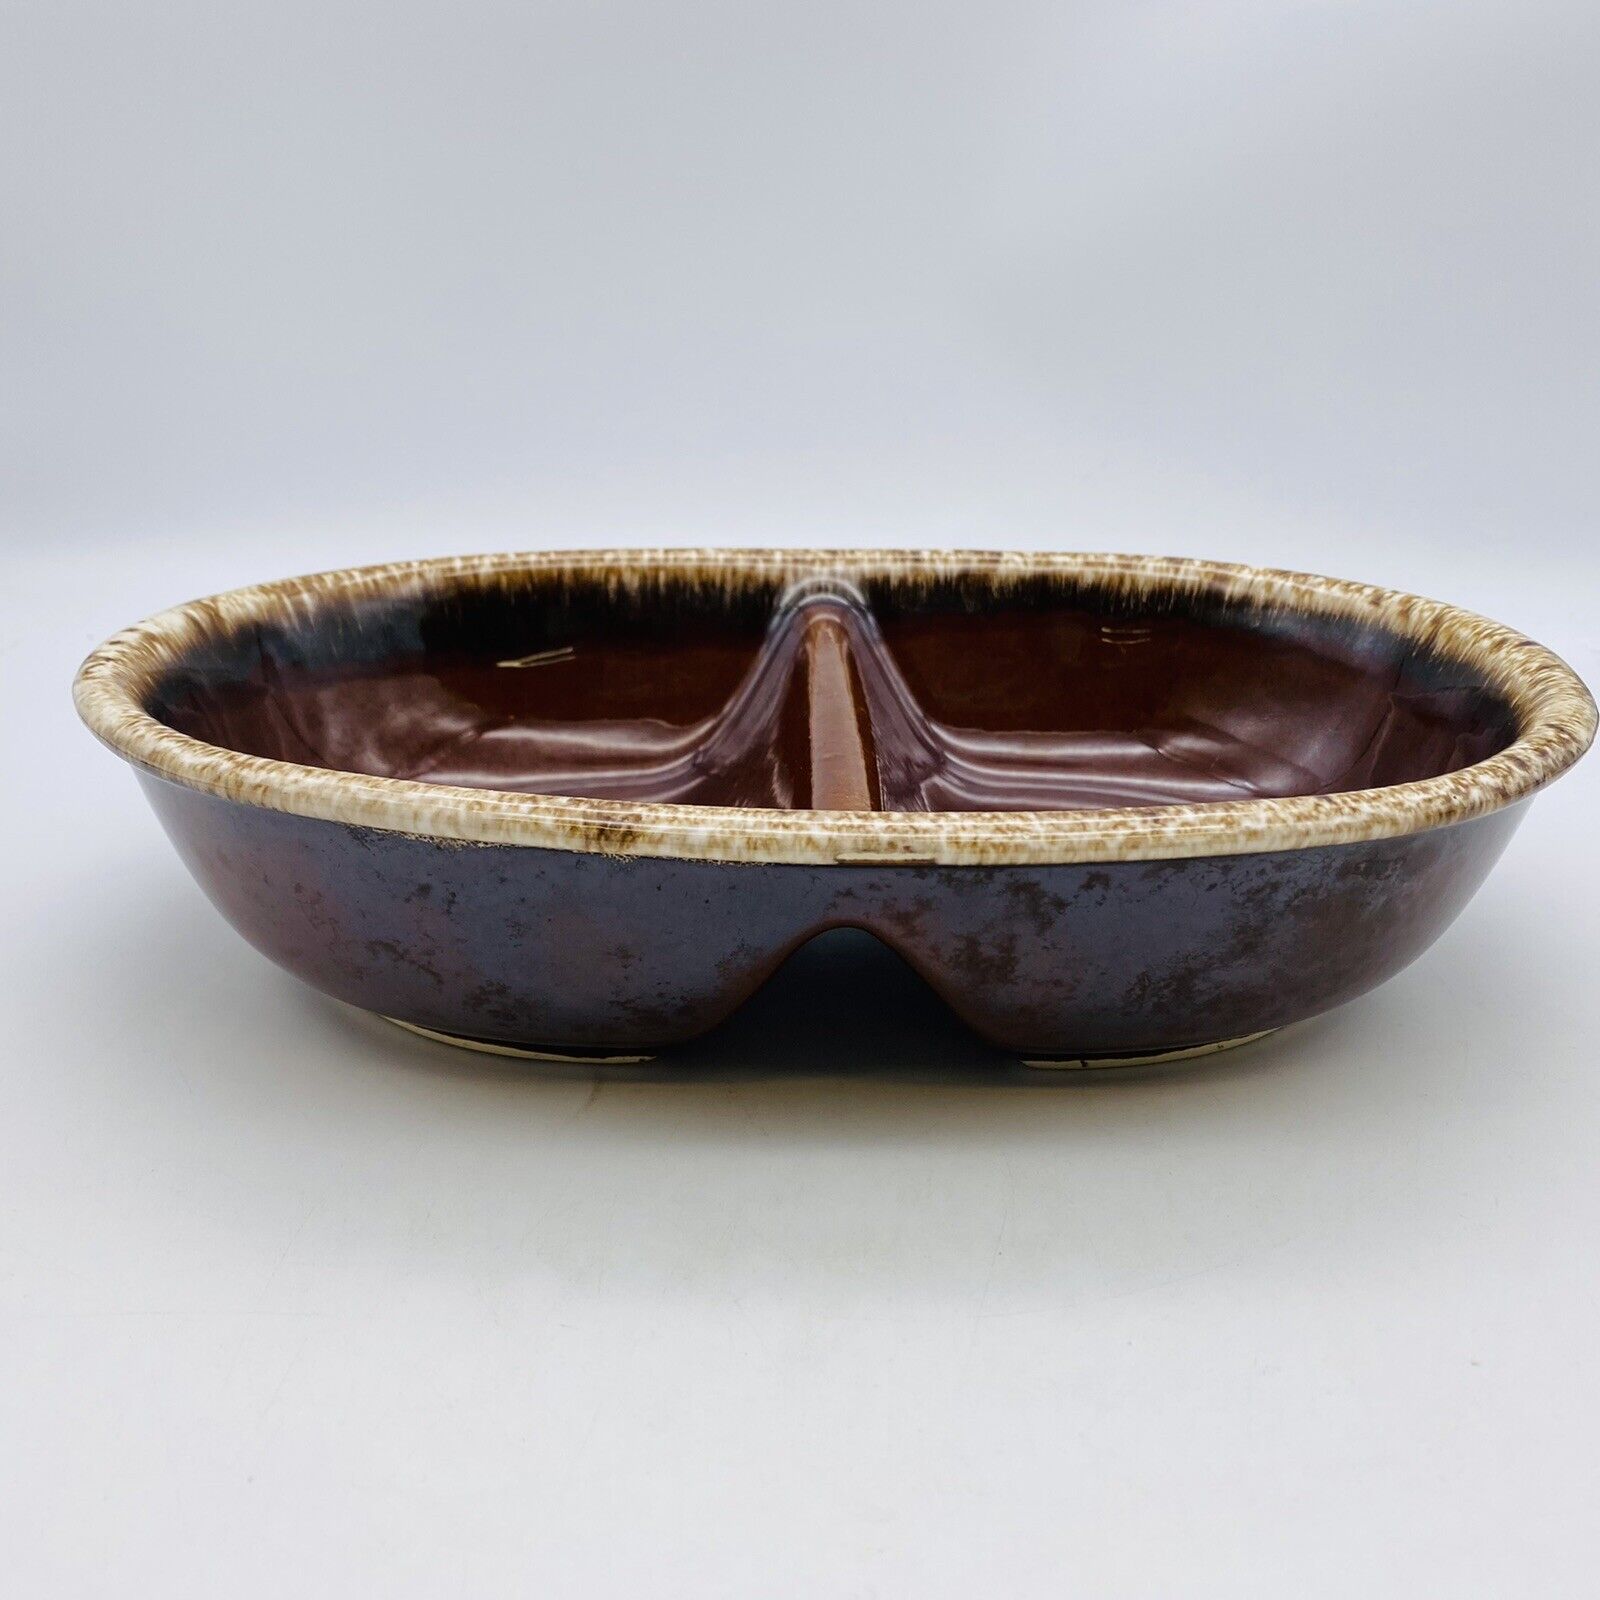 Hull Oval Divided Casserole Pottery Brown Drip Glaze 11